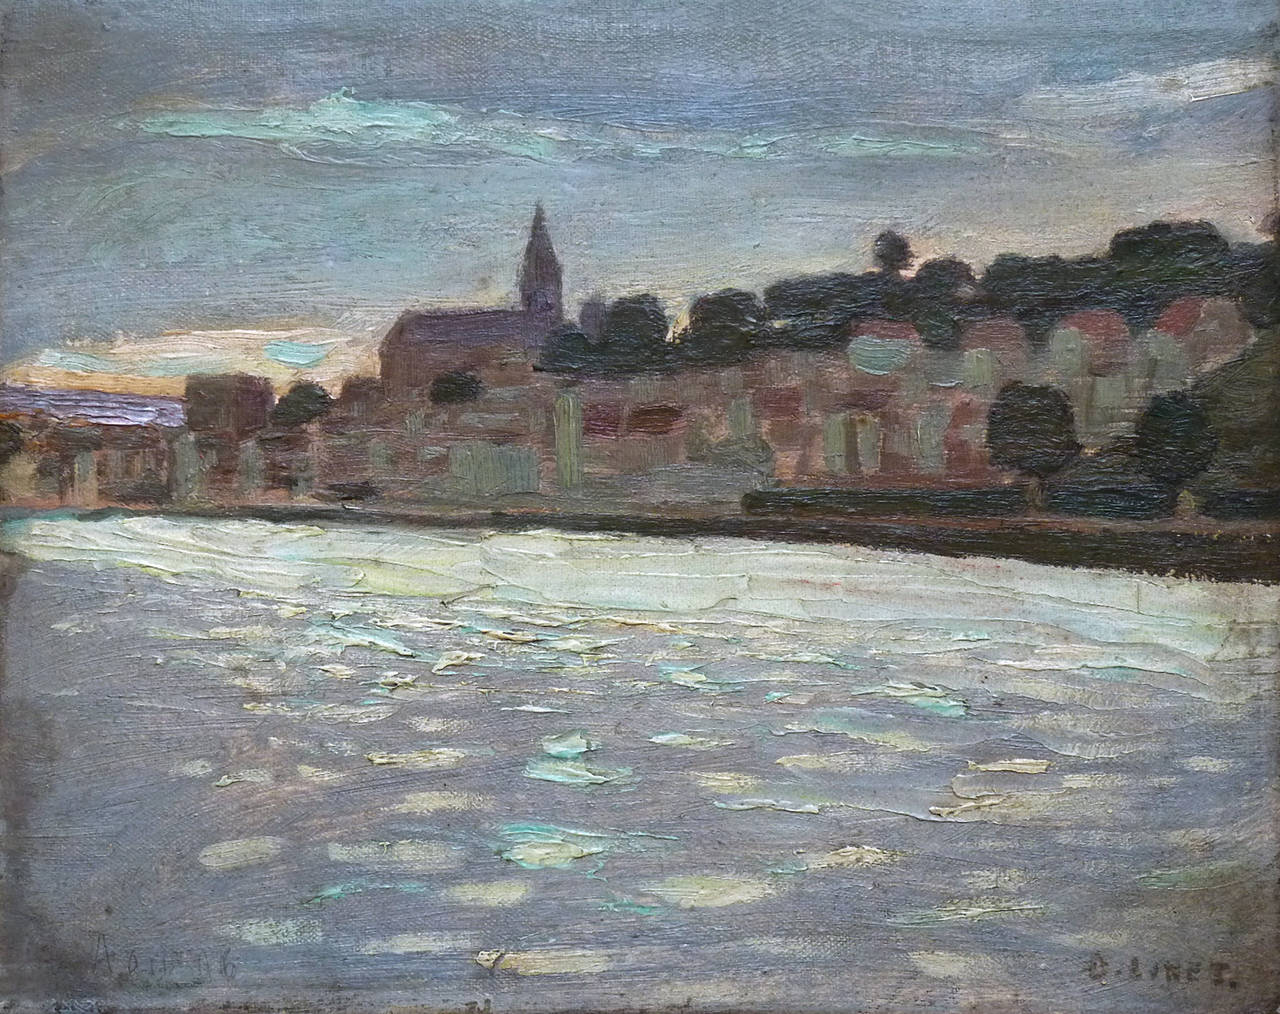 Herblay, alongside the River Seine - Painting by Octave Linet